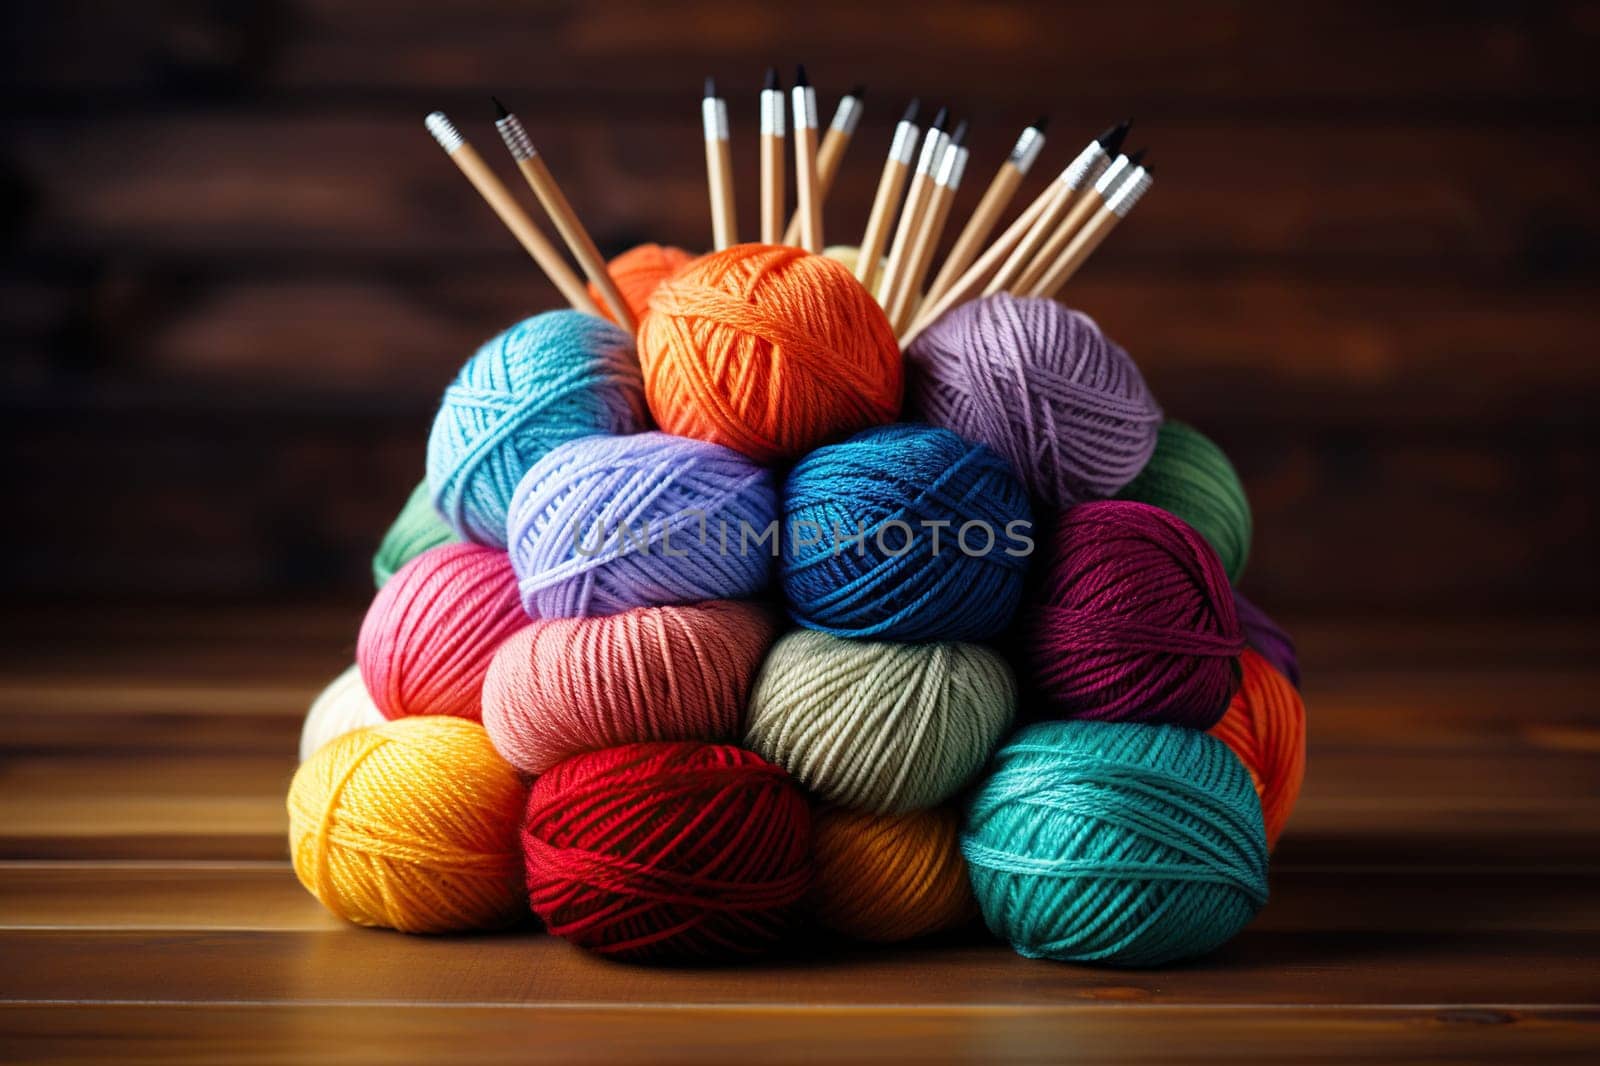 A large stack of balls of yarn with knitting needles on a wooden table. Generated by artificial intelligence by Vovmar